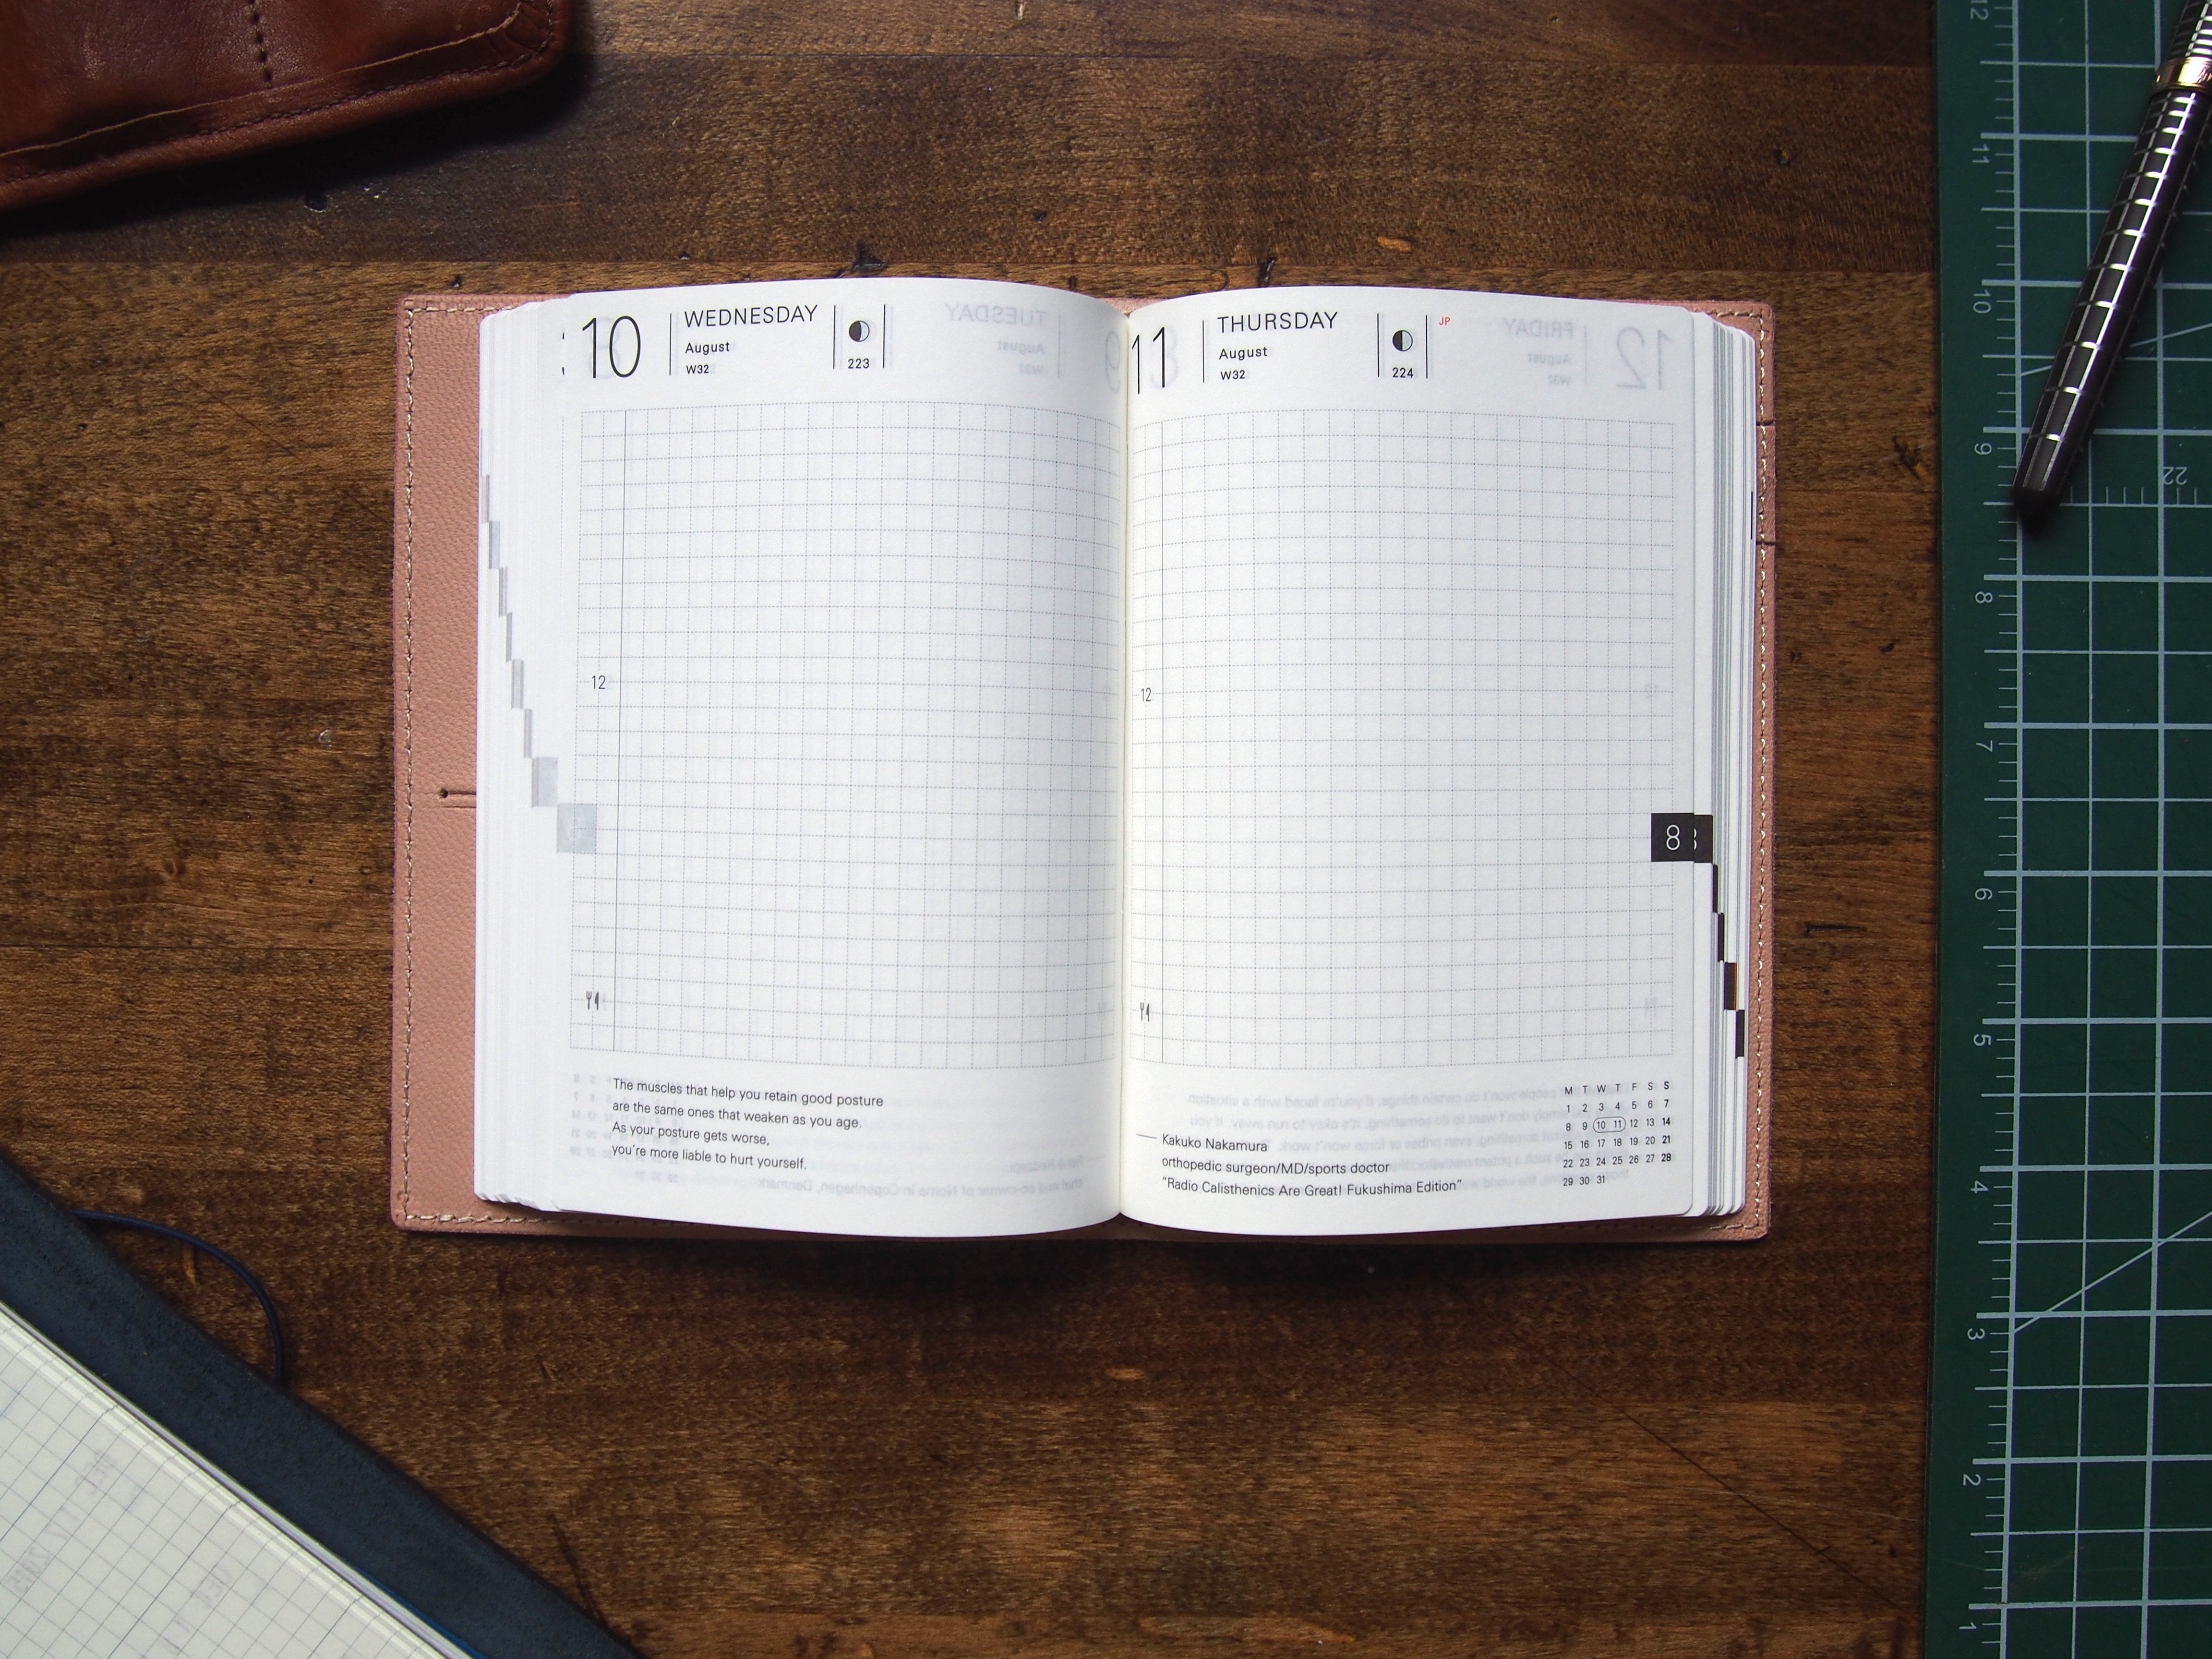 Moving Into My Hobonichi Techo 2016 - The Well-Appointed Desk